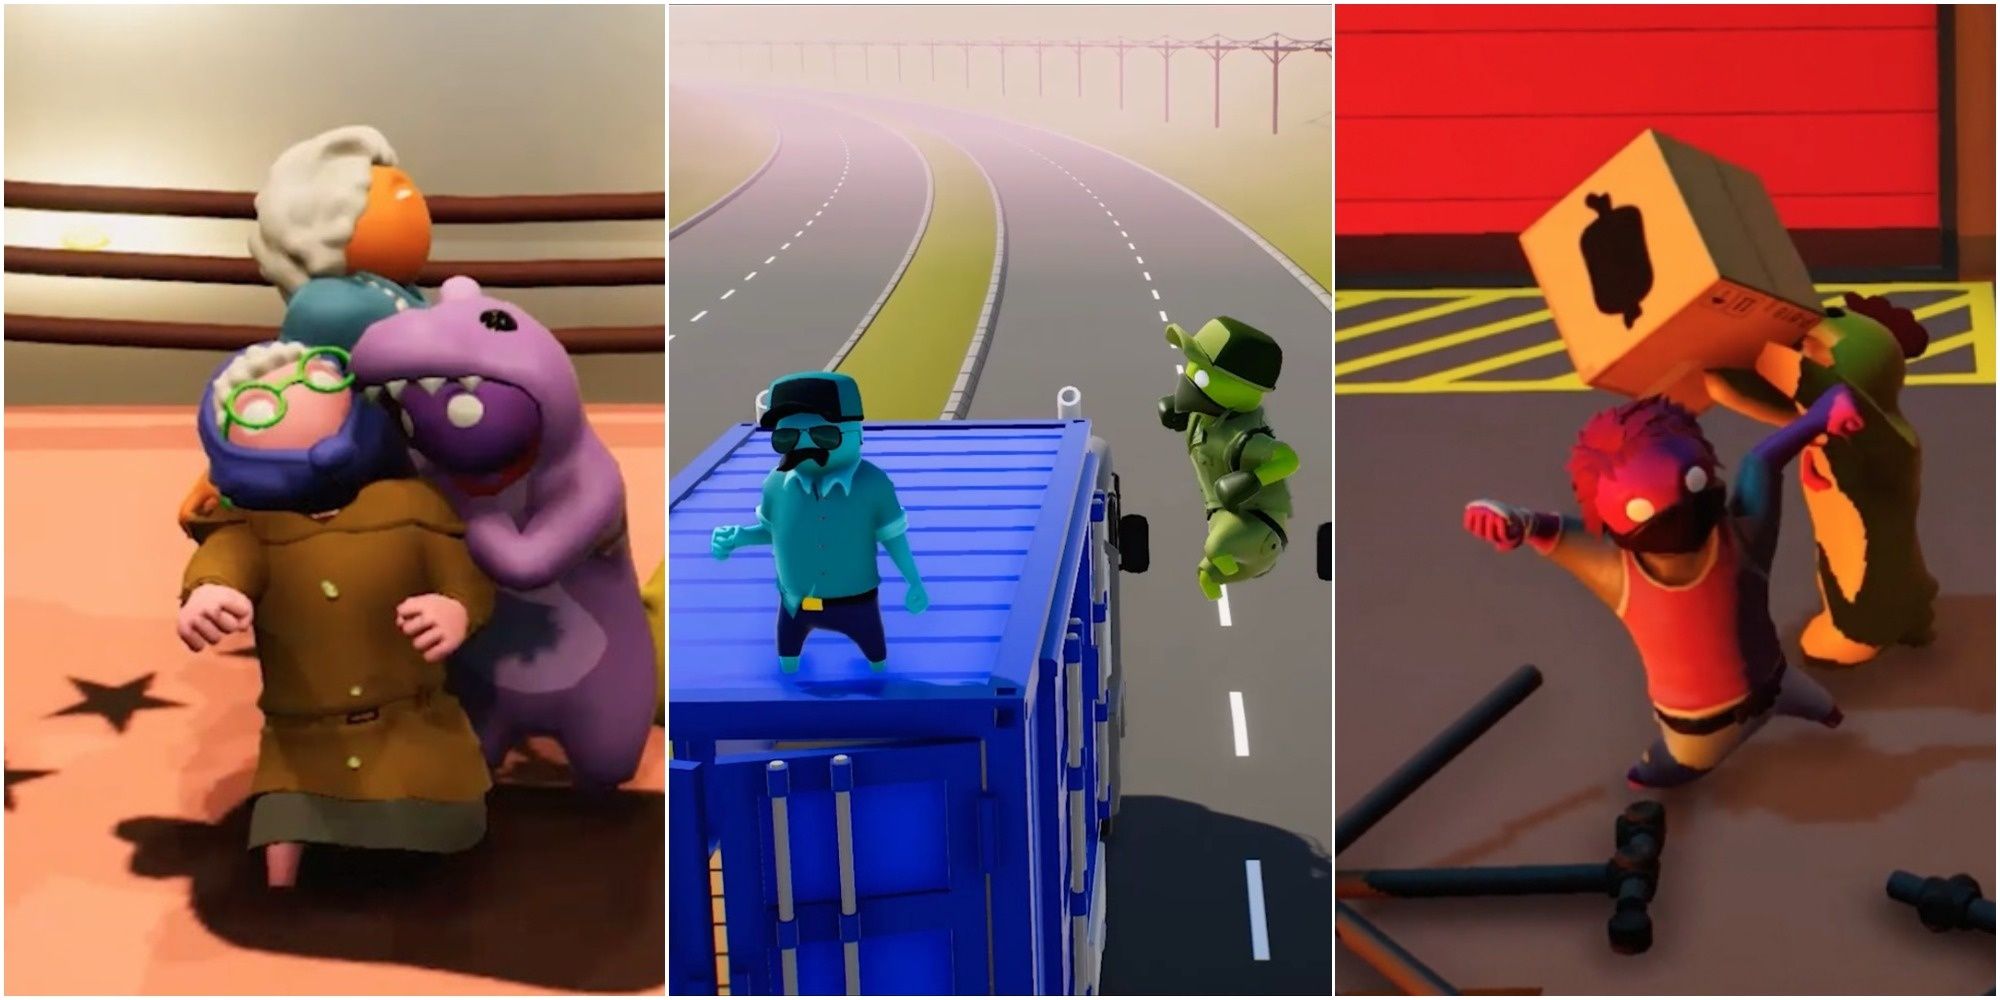 Split image of Gang Beasts fighters throwing, grabbing and leaping in combat